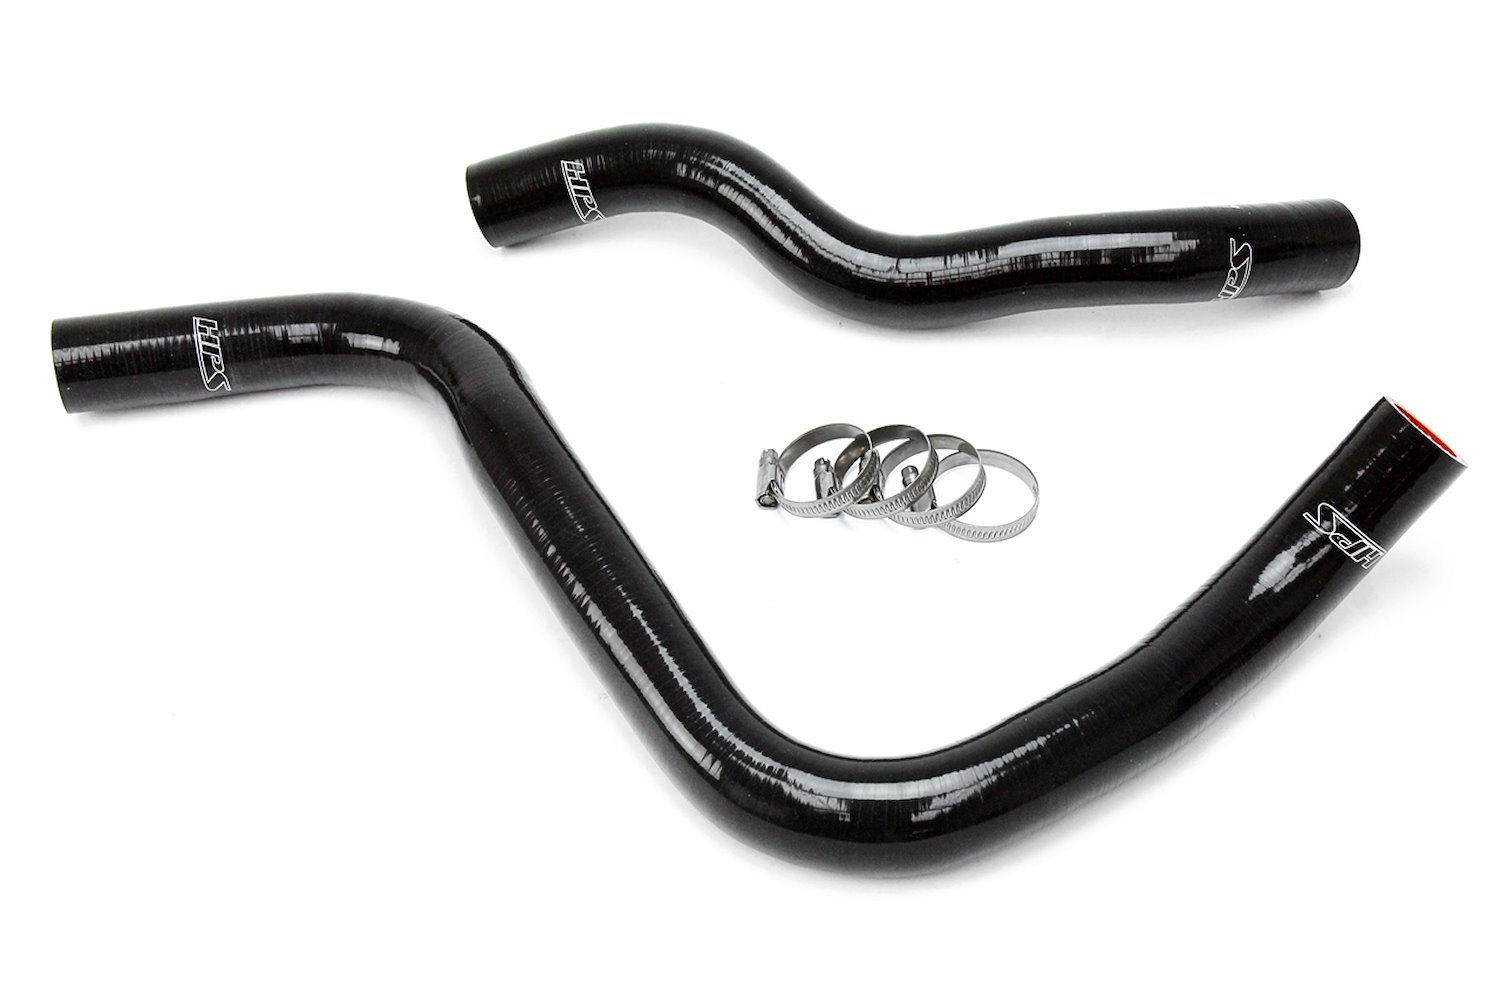 57-1662-BLK Radiator Hose Kit, High-Temp 3-Ply Reinforced Silicone, Replace OEM Rubber Radiator Coolant Hoses